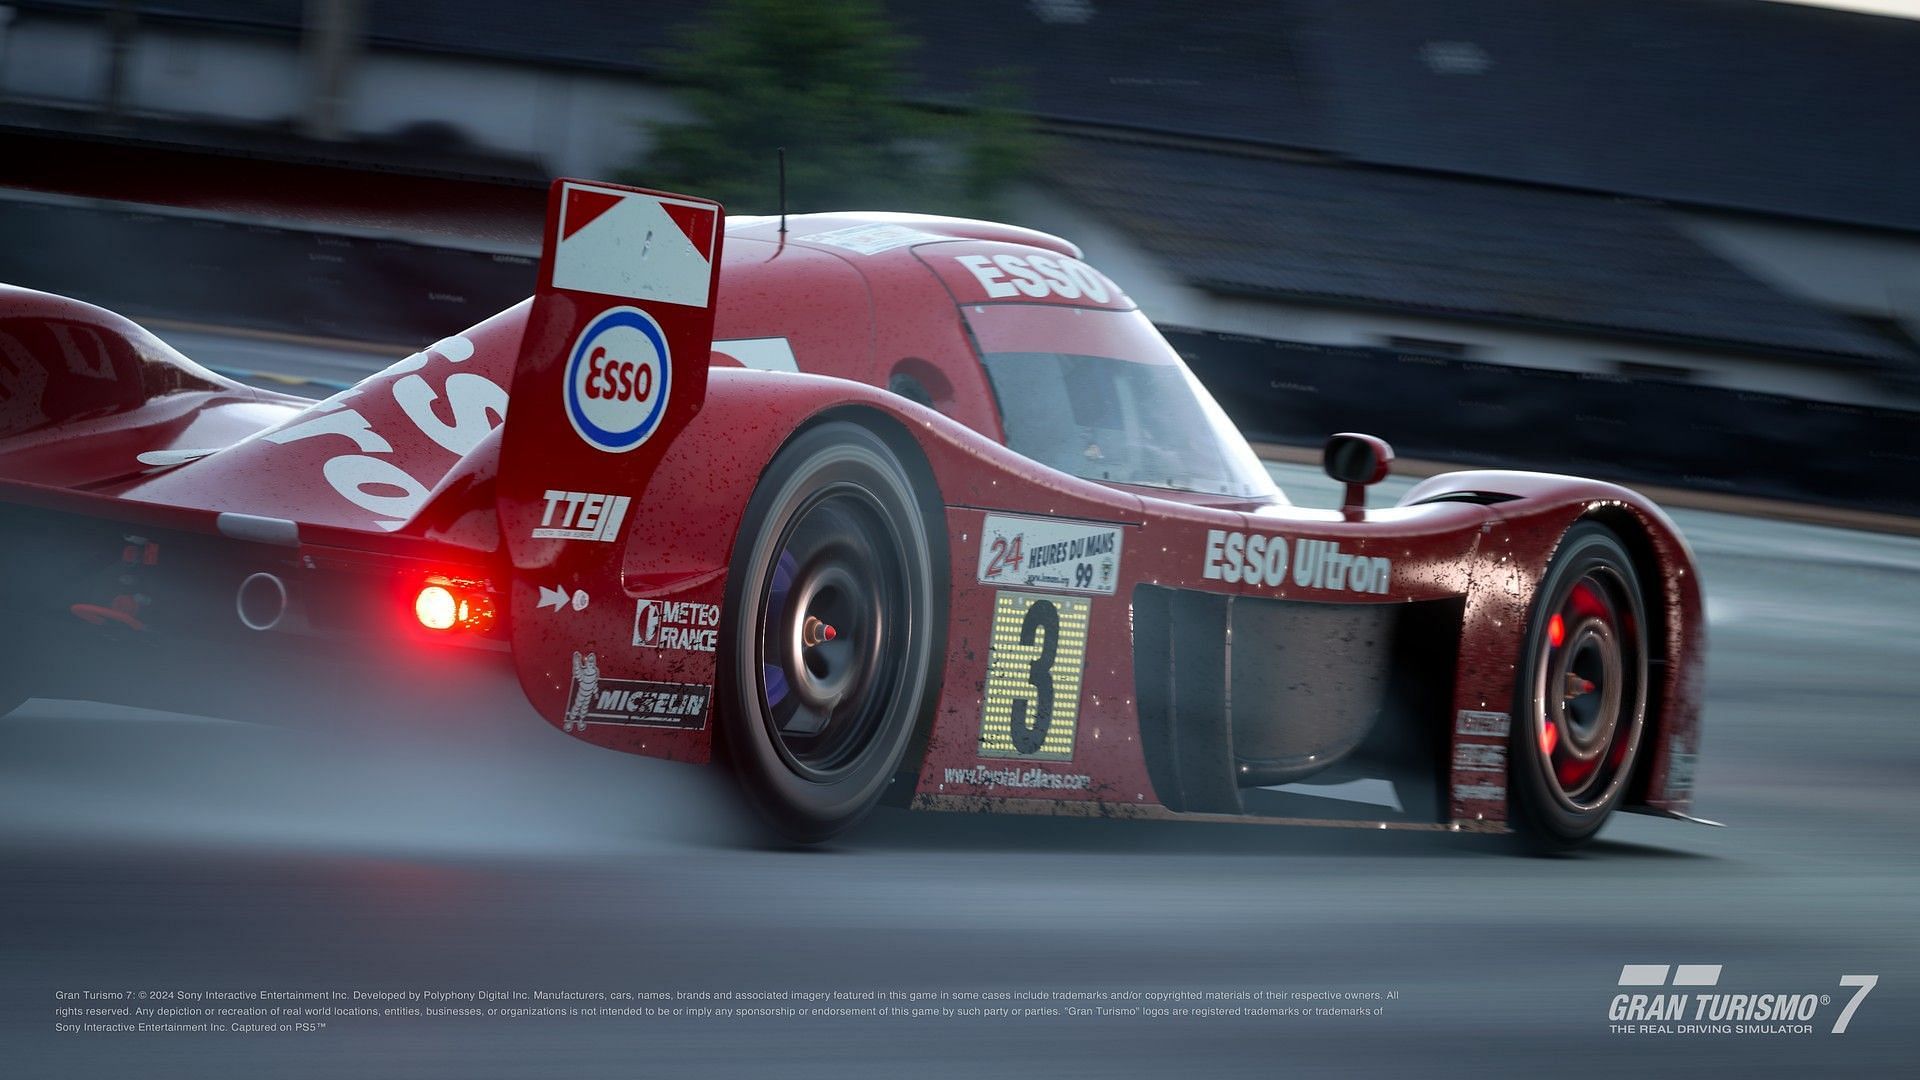 Gran Turismo 7 update 1.46 is now live on PS4 and PS5 (Image via Polyphony Digital || Sony Interactive Entertainment)